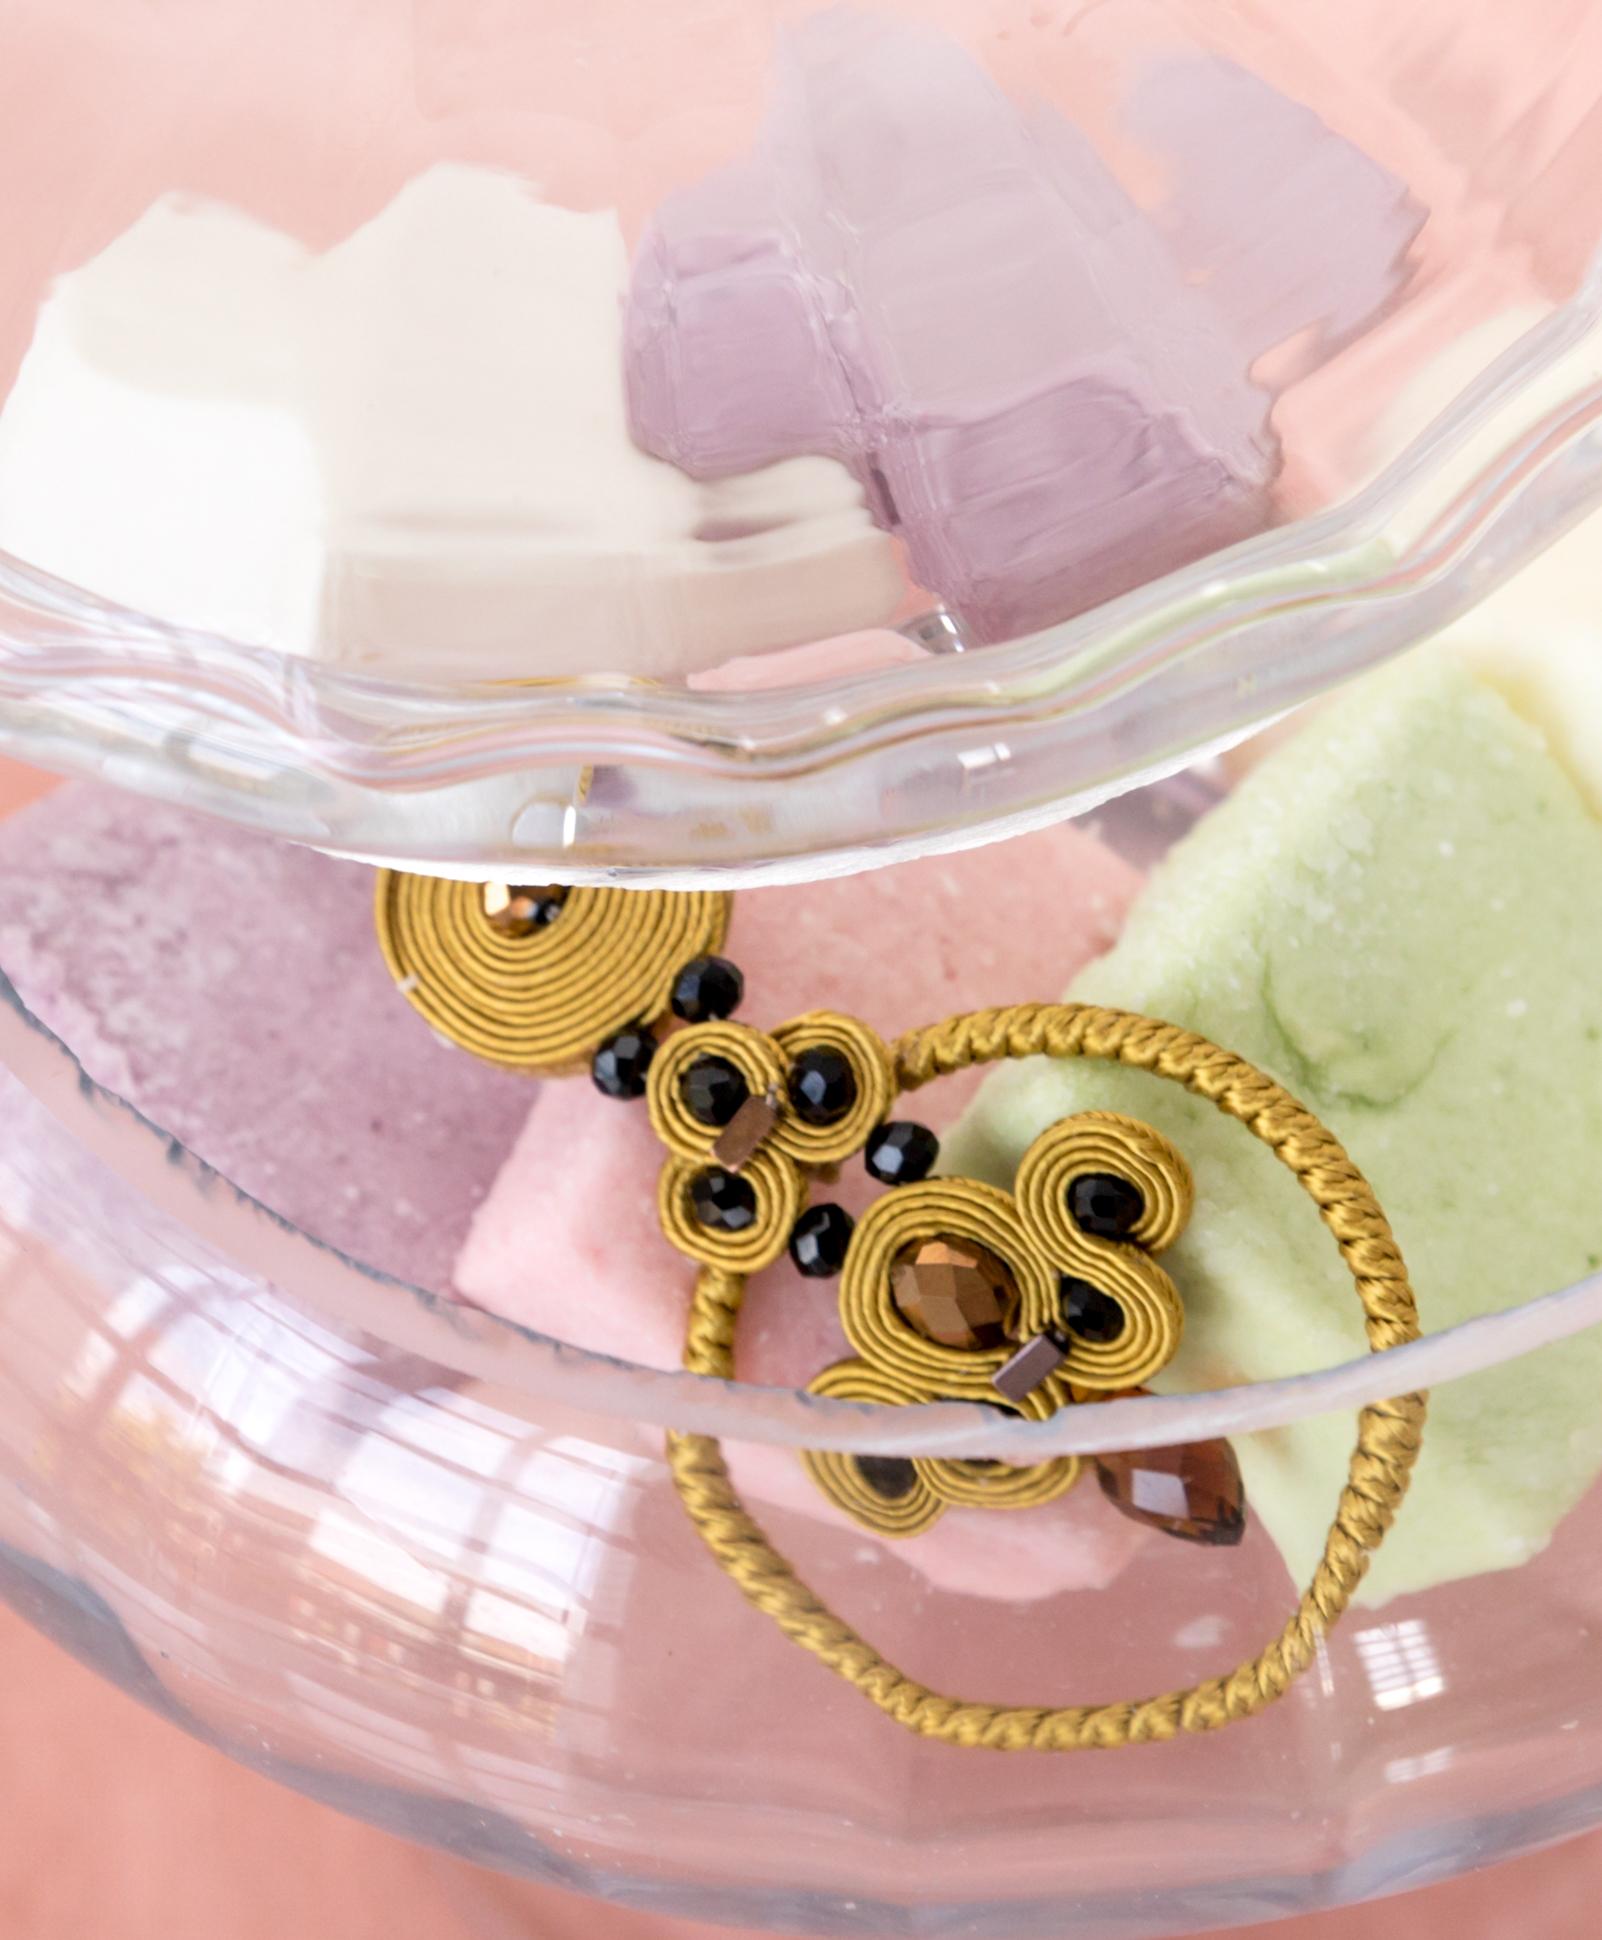 Musula La Patisserie Macarons Vanille Earrings
La Patisserie Collection is a special homage to sweet lovers
Musula in the Fall collection 2021 wants  to pay tribute to the sweet and delicate Pastry world. Pastries have been always a must at our most